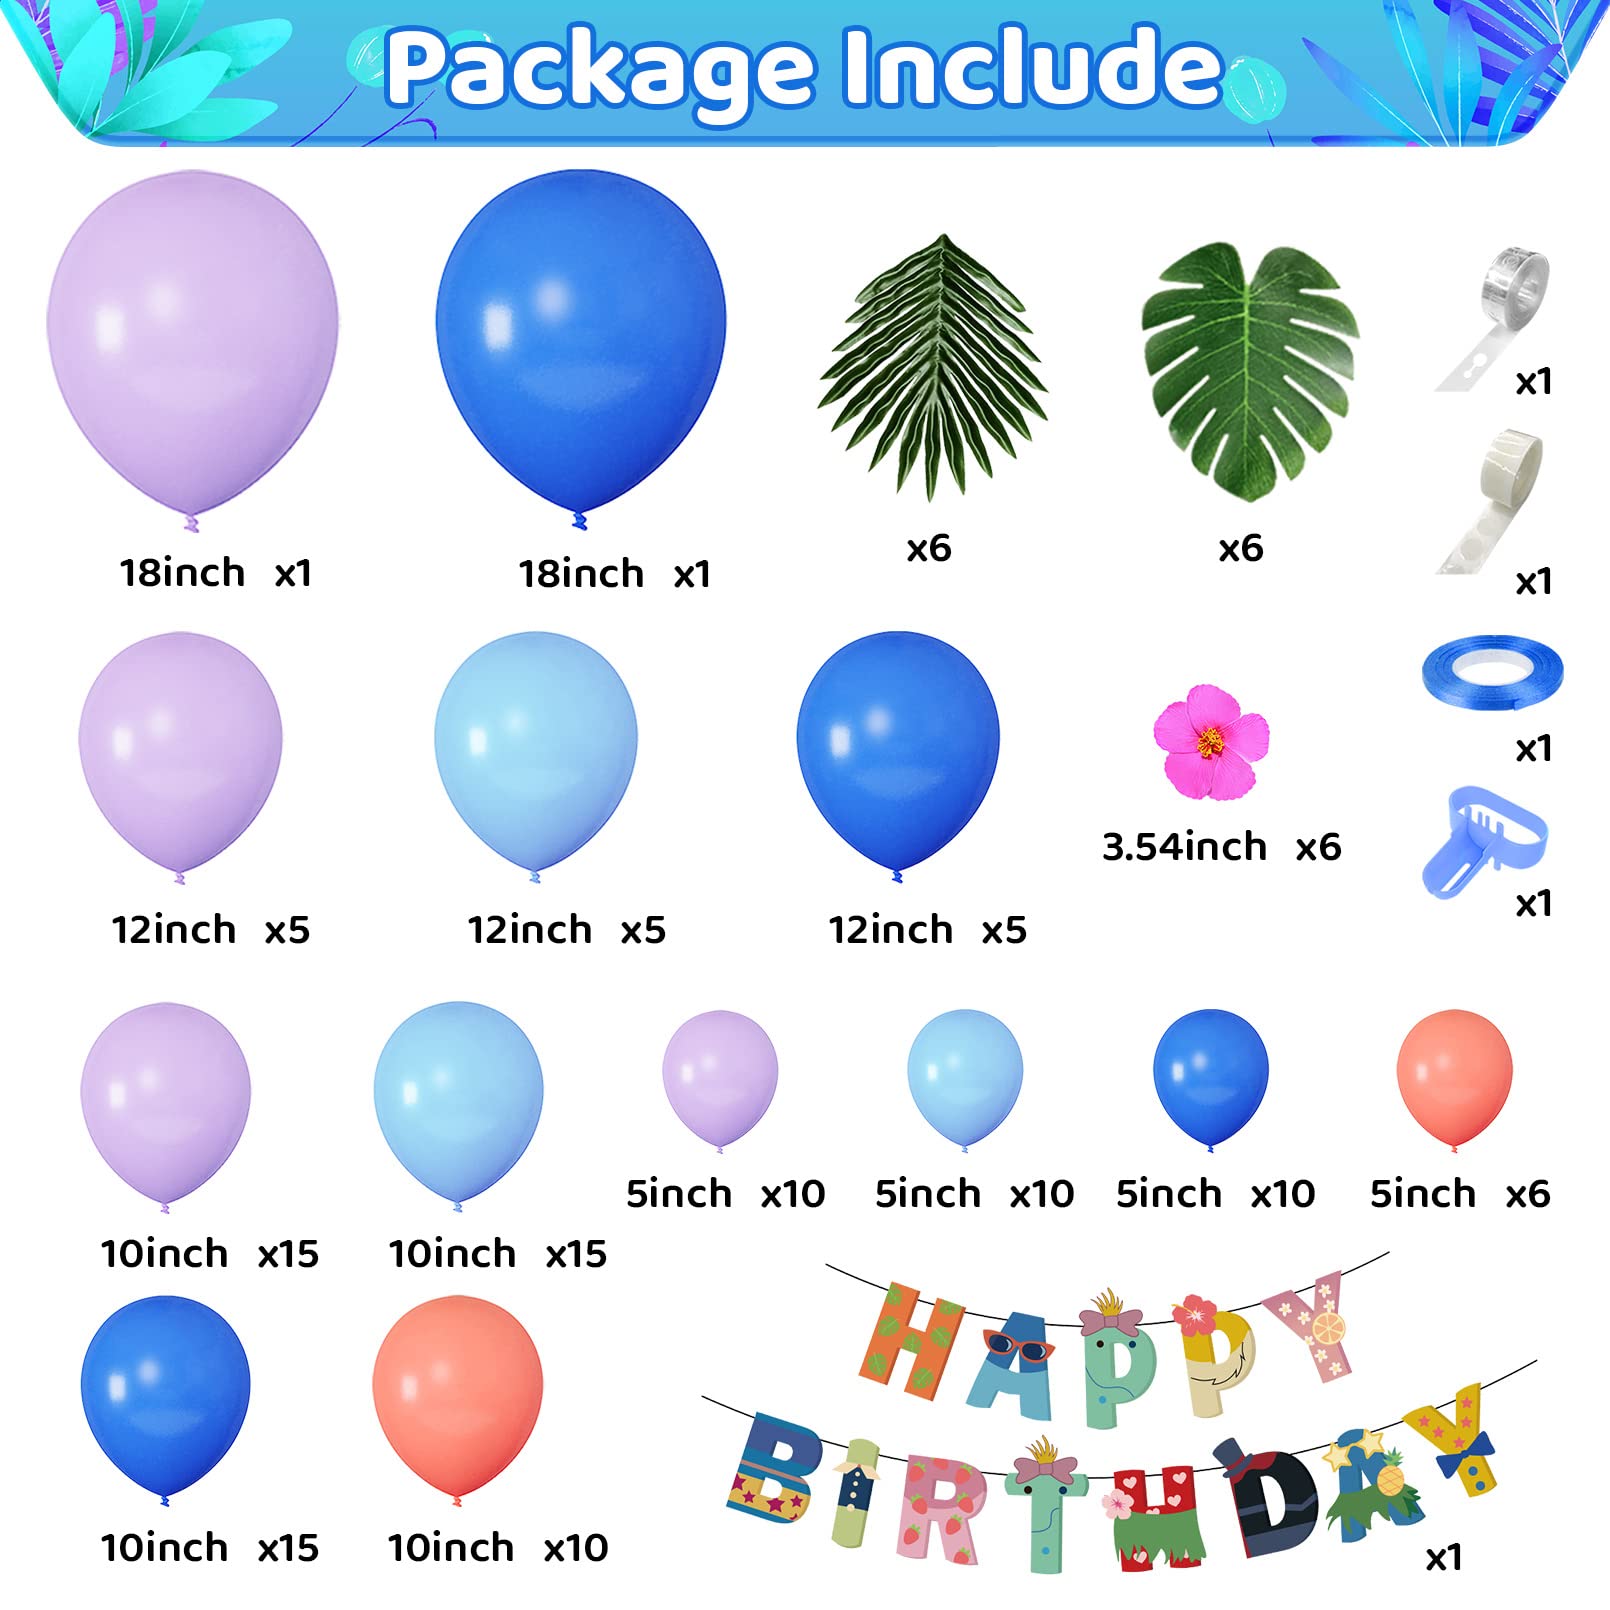 131Pcs Stich Balloons Birthday Party Decorations Garland Arch Kit, Blue Purple Balloon Happy Birthday Banner Palm Leaves Flower for Kids Stich Birthday Baby Shower Hawaii Tropical Party Supplies